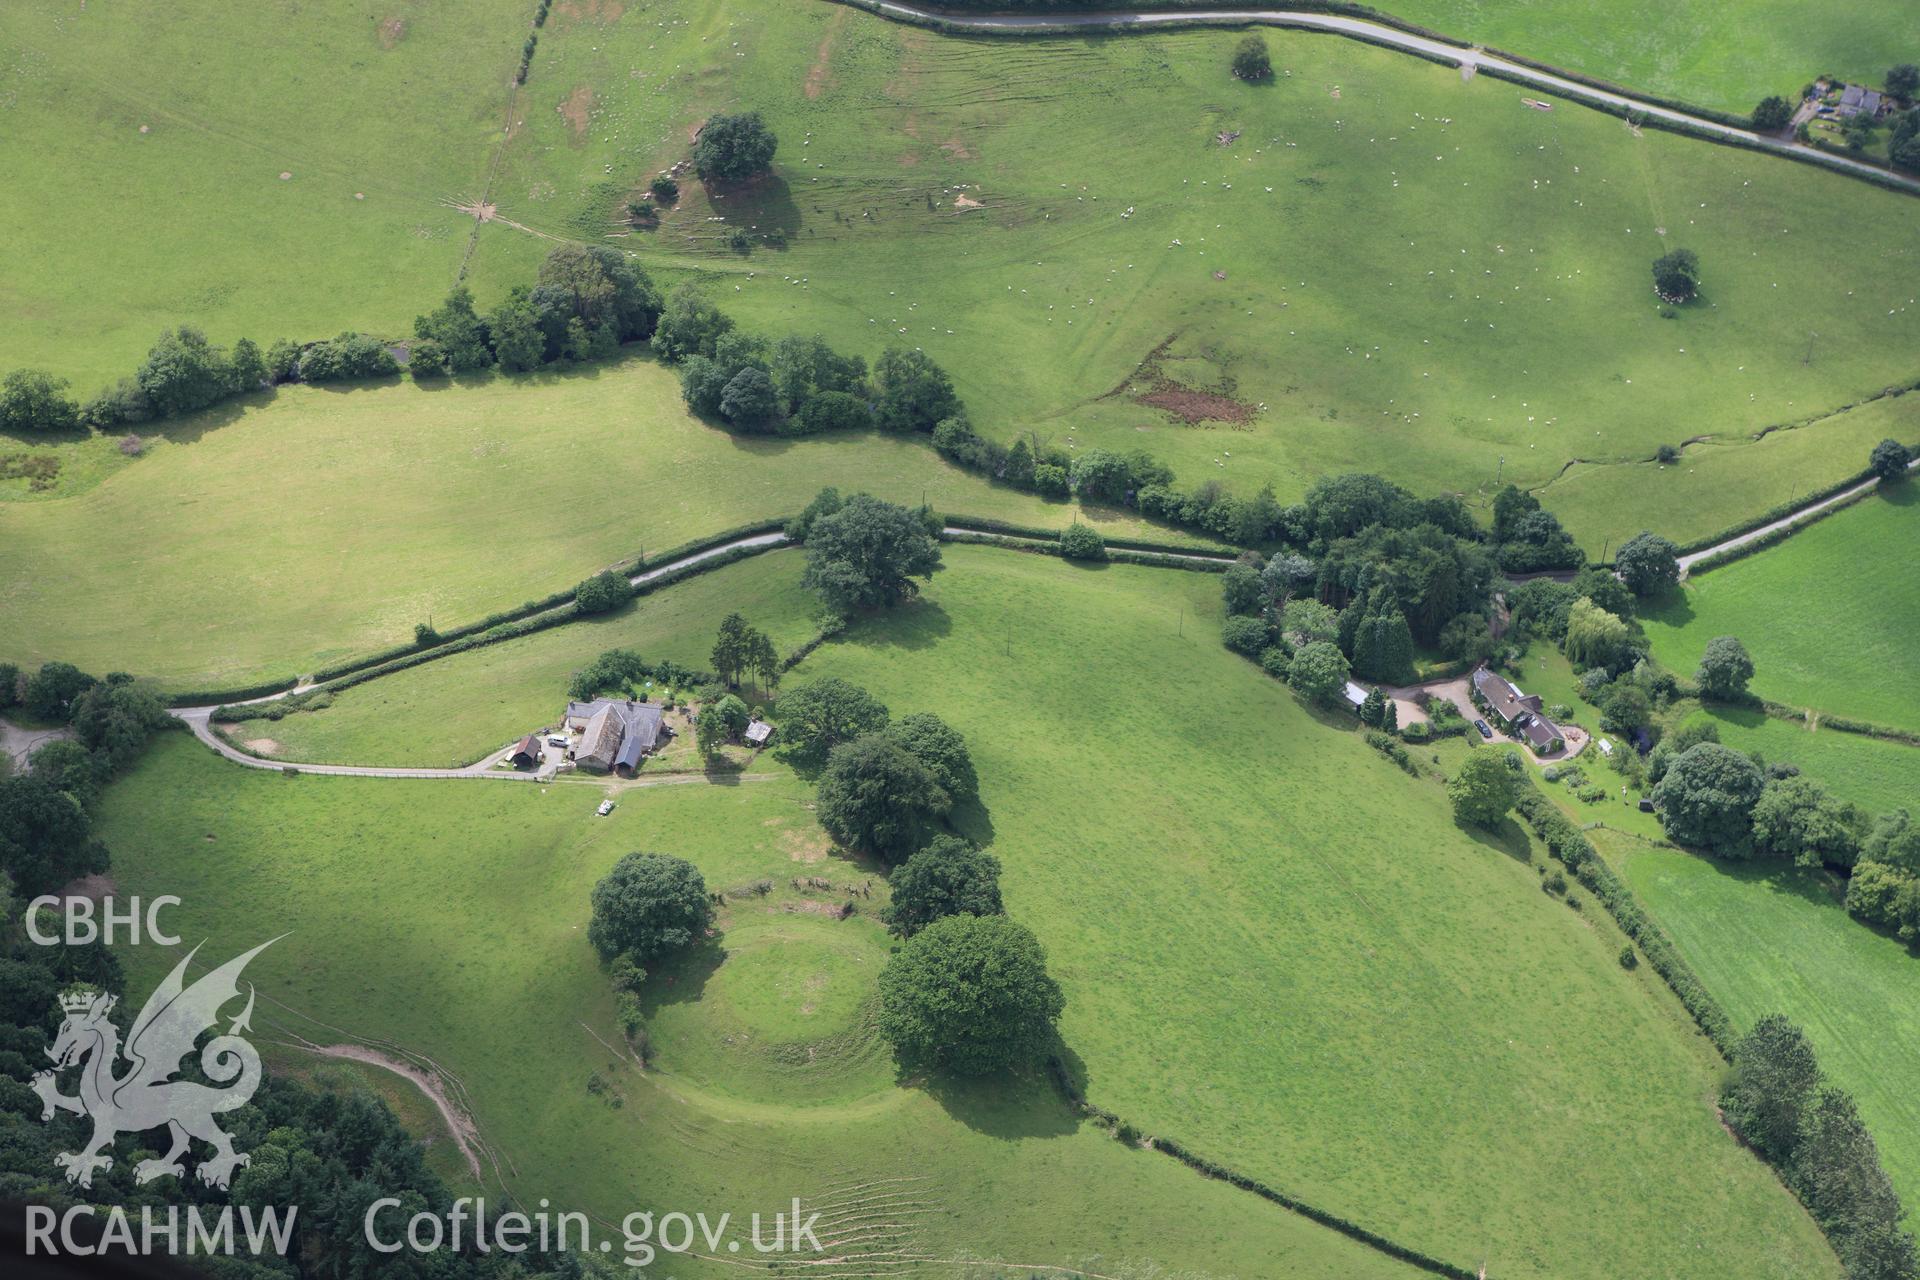 RCAHMW colour oblique aerial photograph of Long Hill Enclosure. Taken on 08 July 2009 by Toby Driver